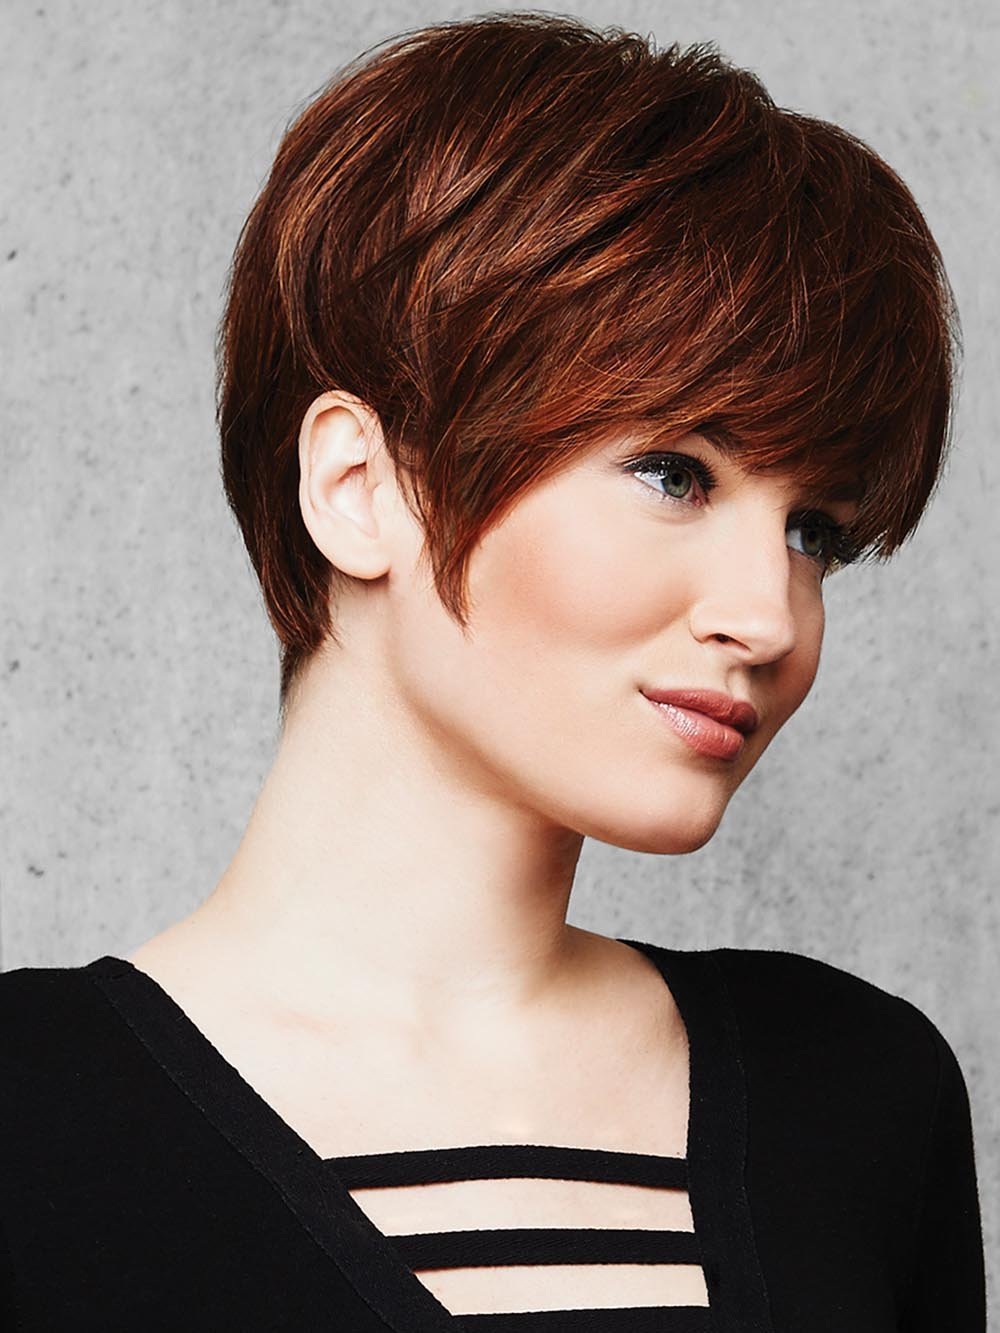 A classic “boy cut”, the SHORT TEXTURED PIXIE CUT Wig by Hairdo features textured bangs and all over precision tapered layers that blend into a neck-hugging nape